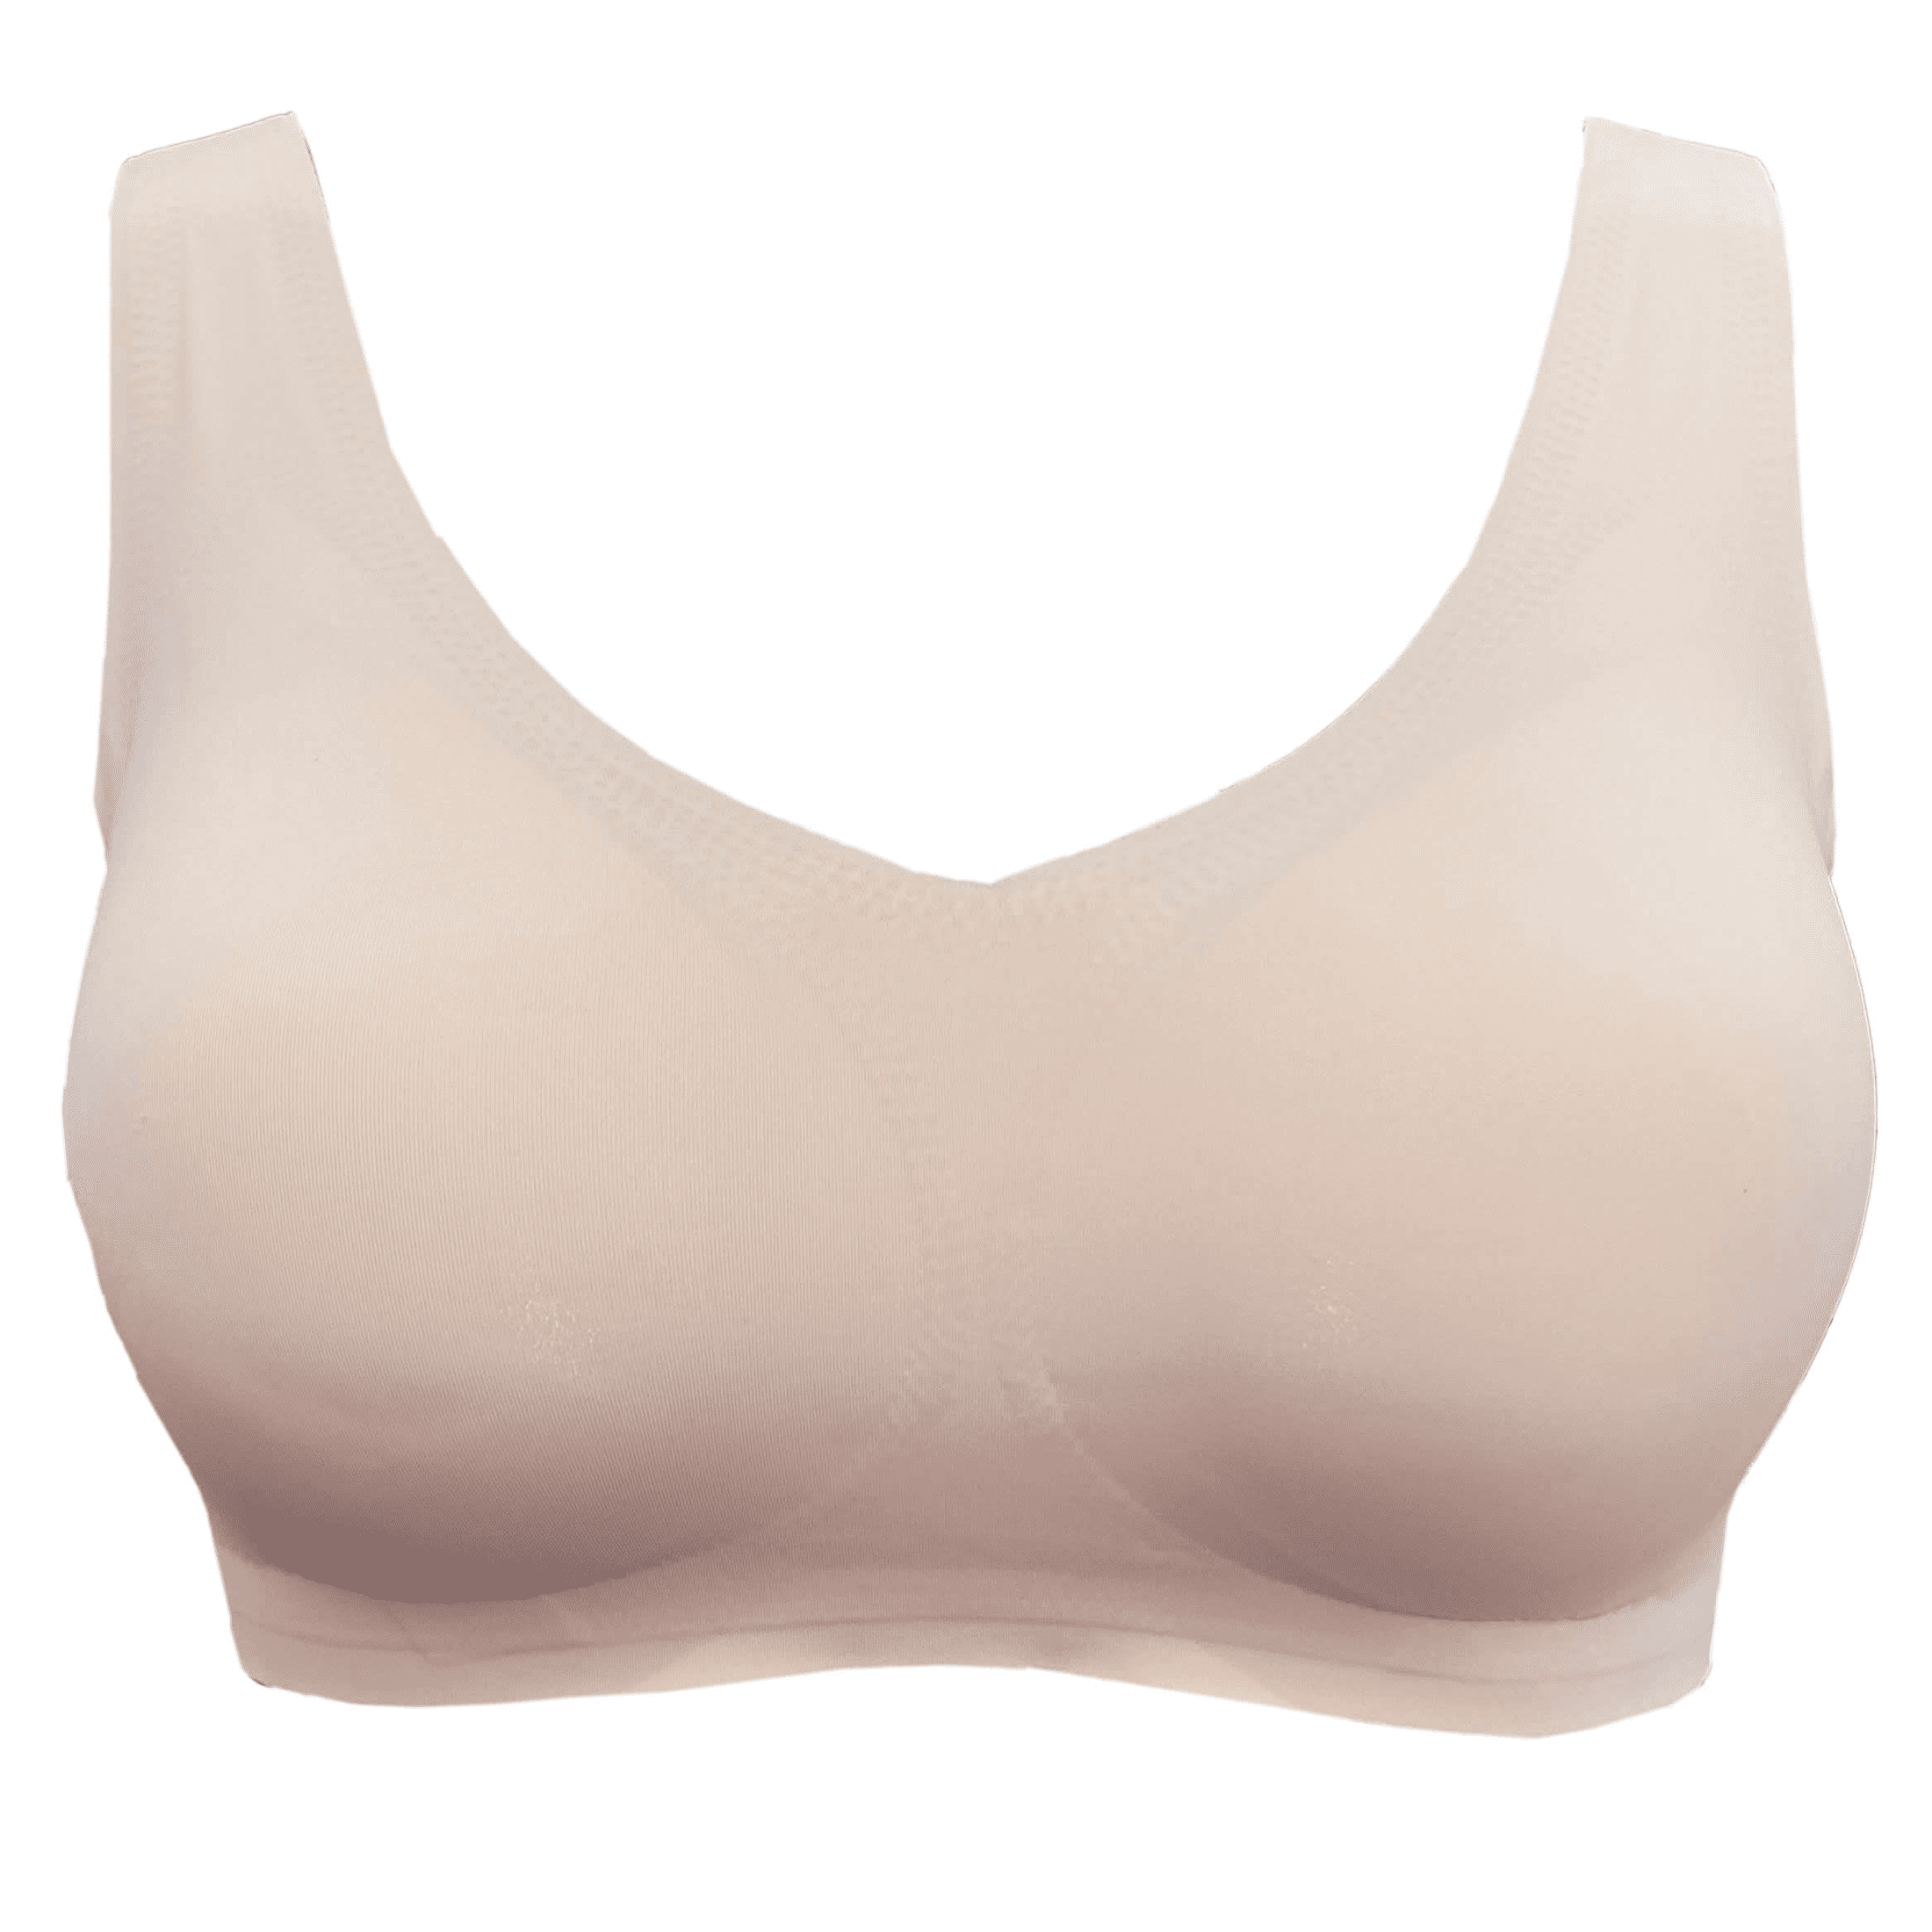 BIMEI Seamless Mastectomy Bra for Women Breast Prosthesis with Pockets  Sleep Bras Soft Daily Bras with Removable Pads,Beige,3XL 